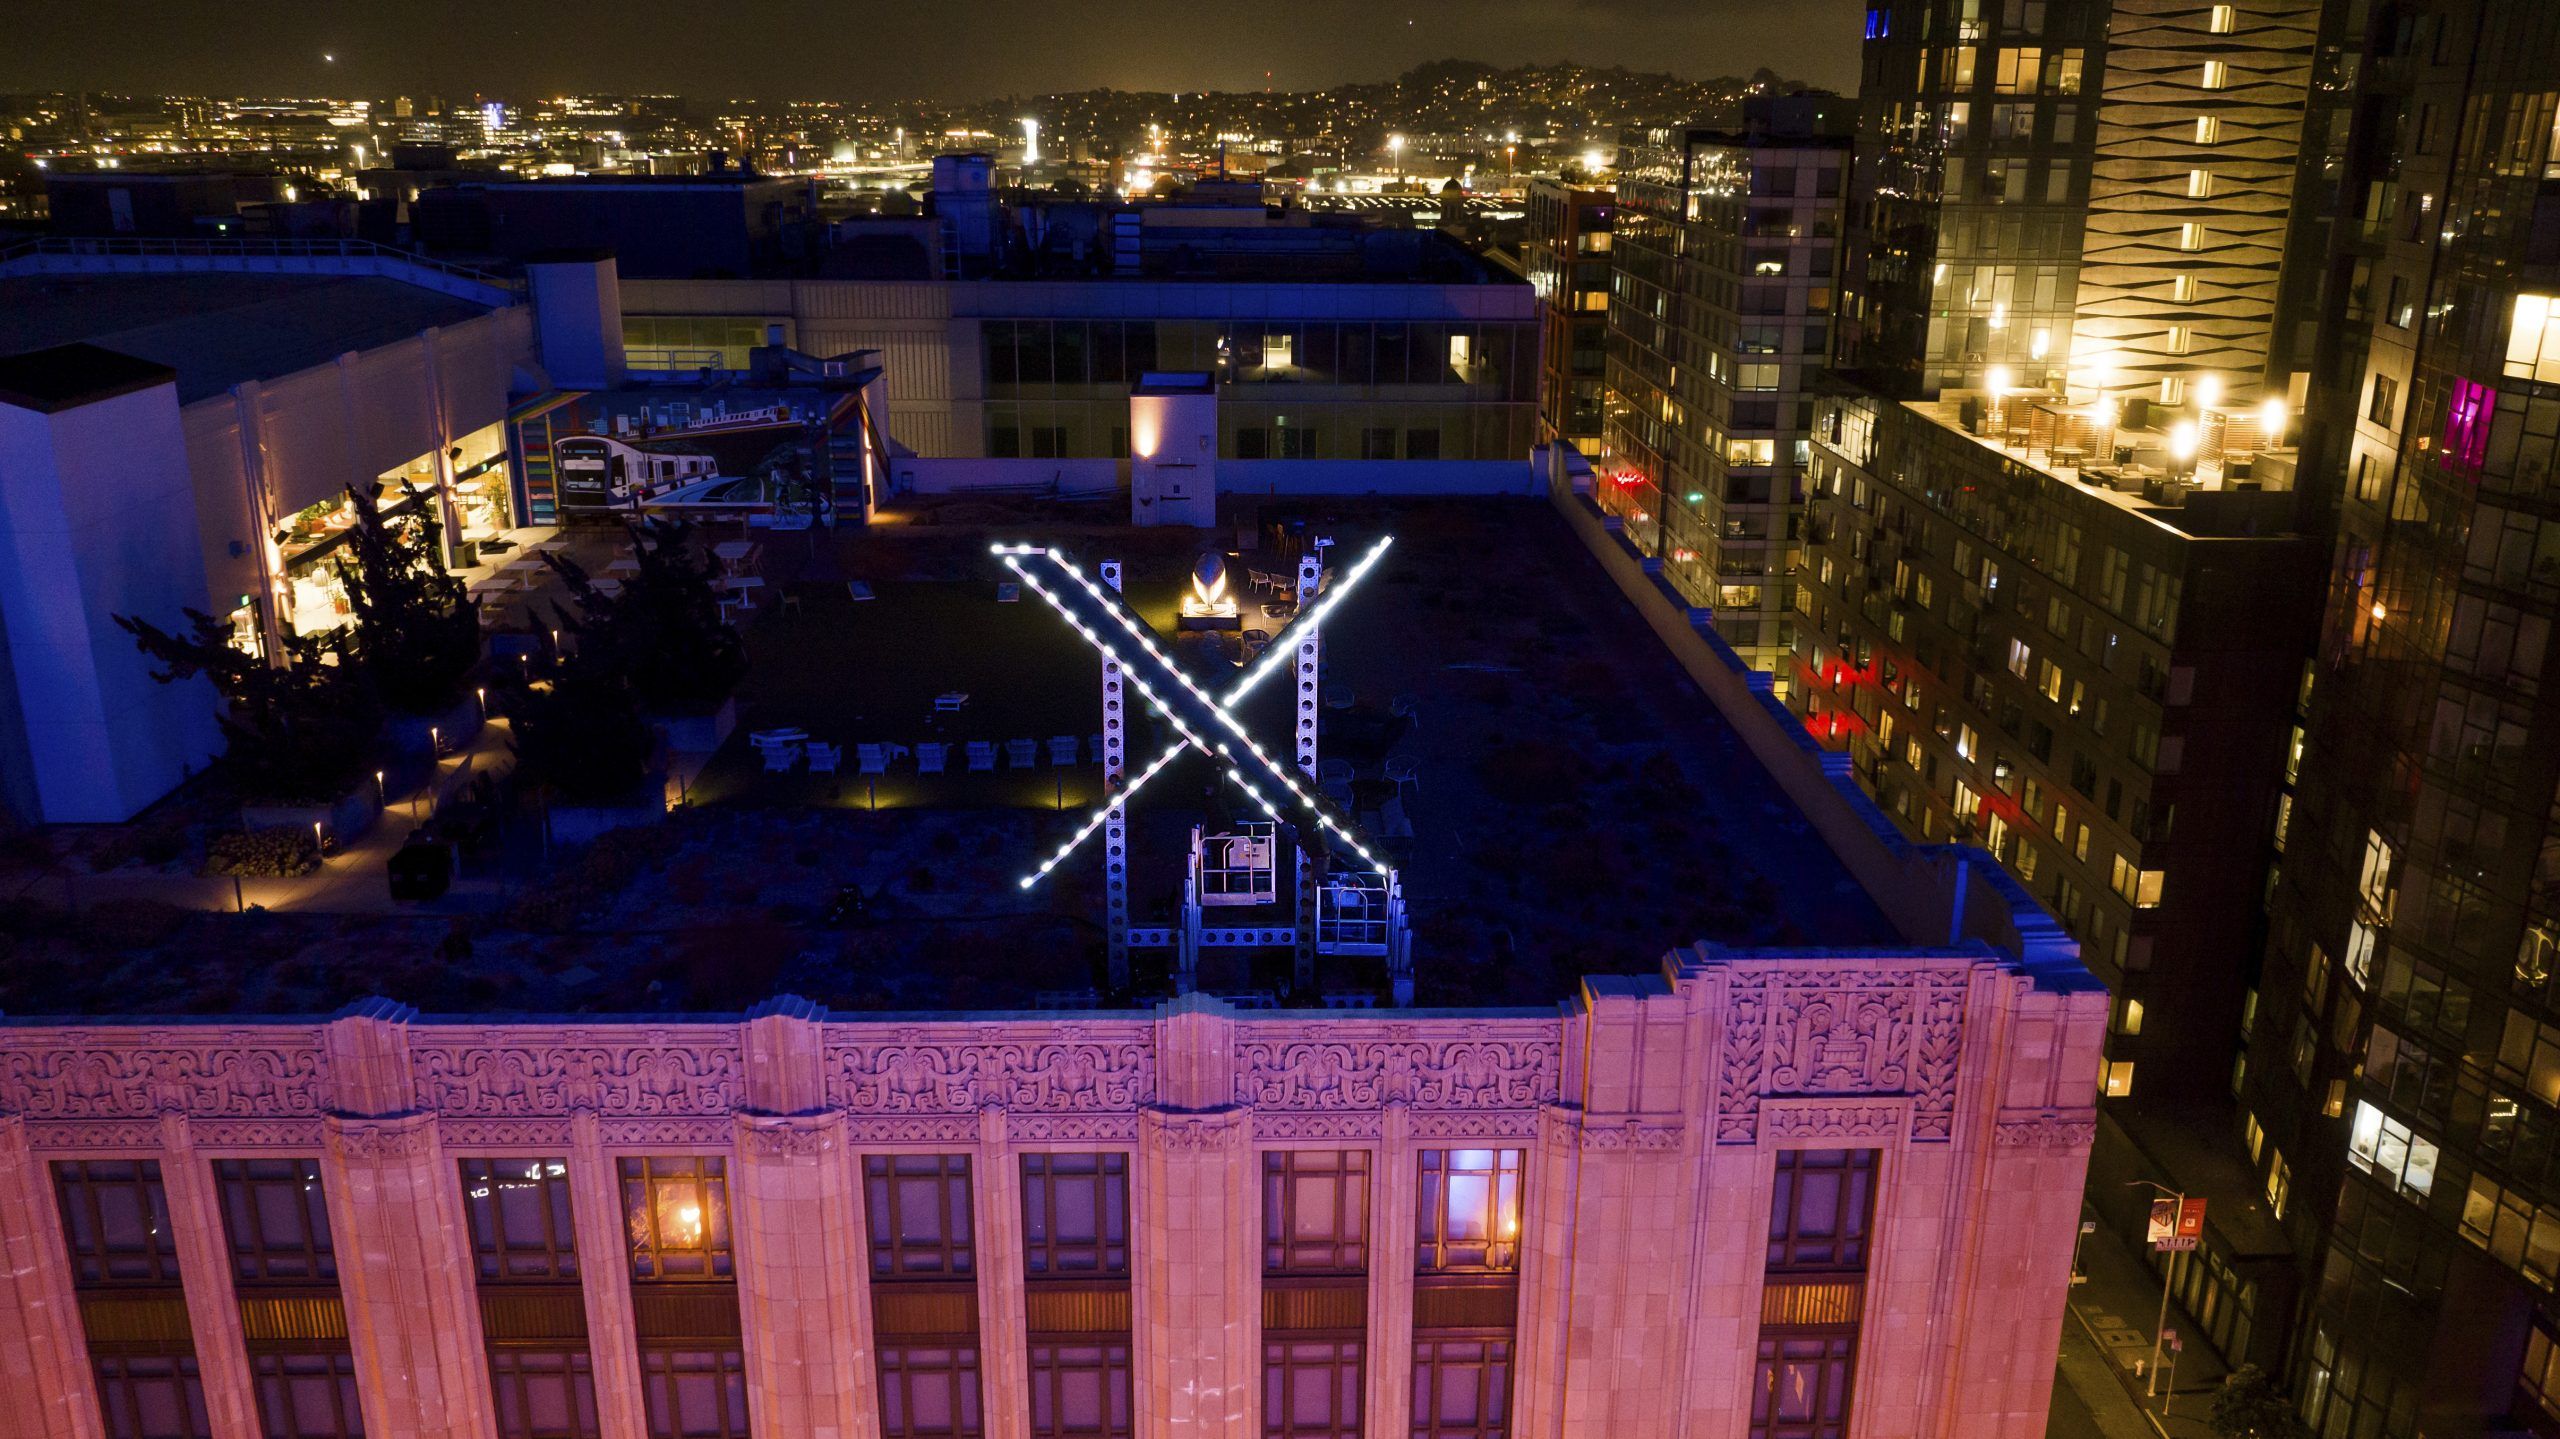 Brightly flashing 'X' sign removed from ex-Twitter's San Francisco